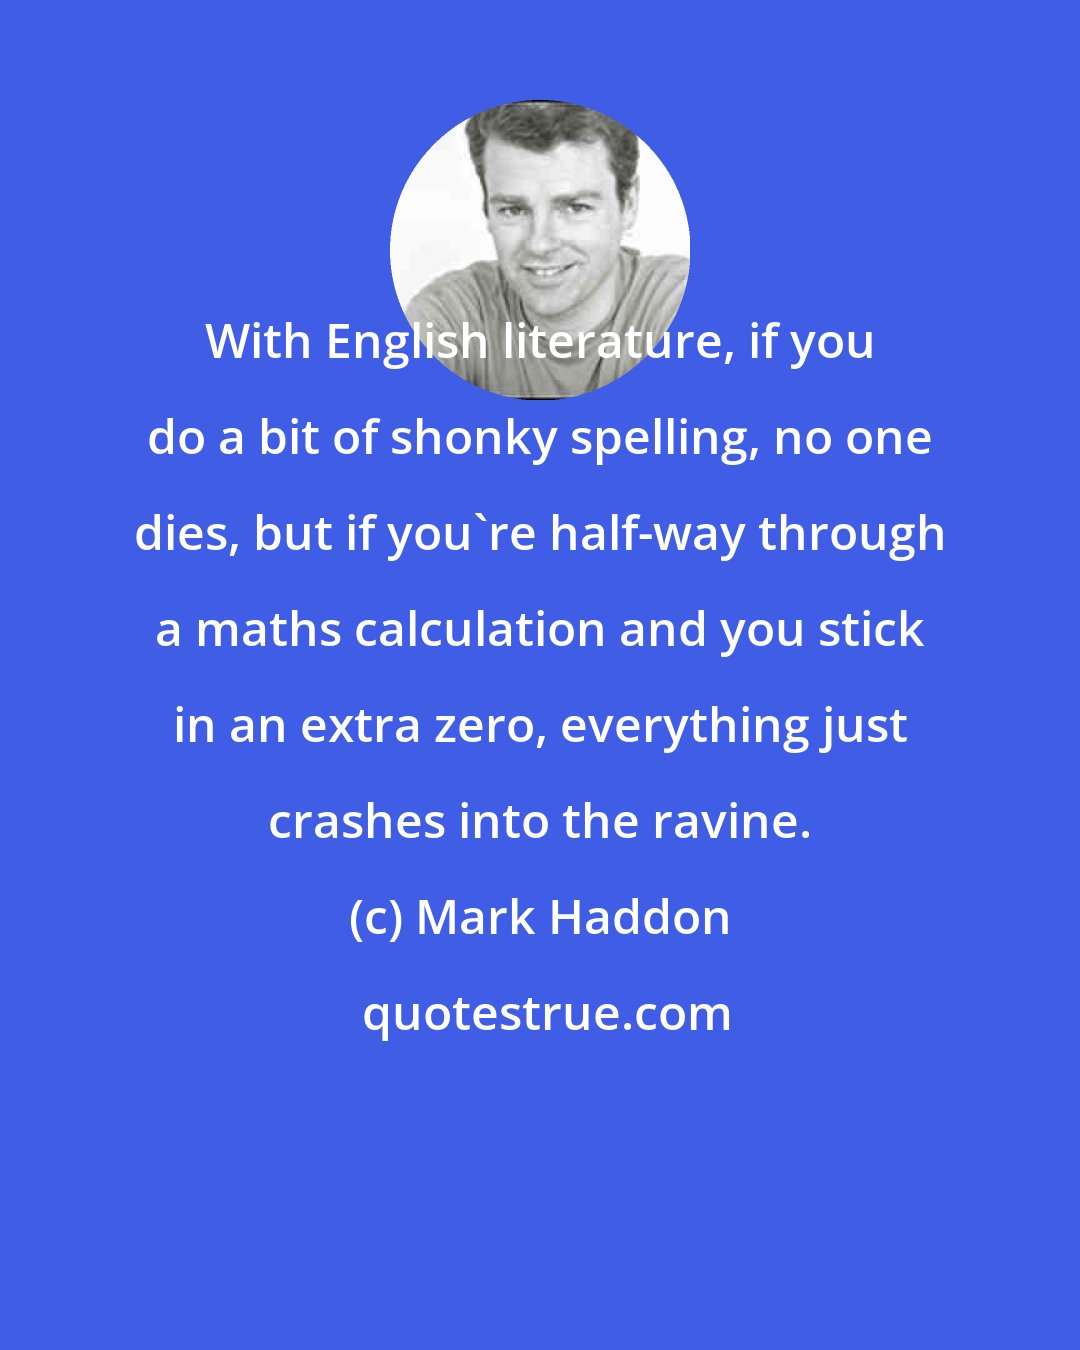 Mark Haddon: With English literature, if you do a bit of shonky spelling, no one dies, but if you're half-way through a maths calculation and you stick in an extra zero, everything just crashes into the ravine.